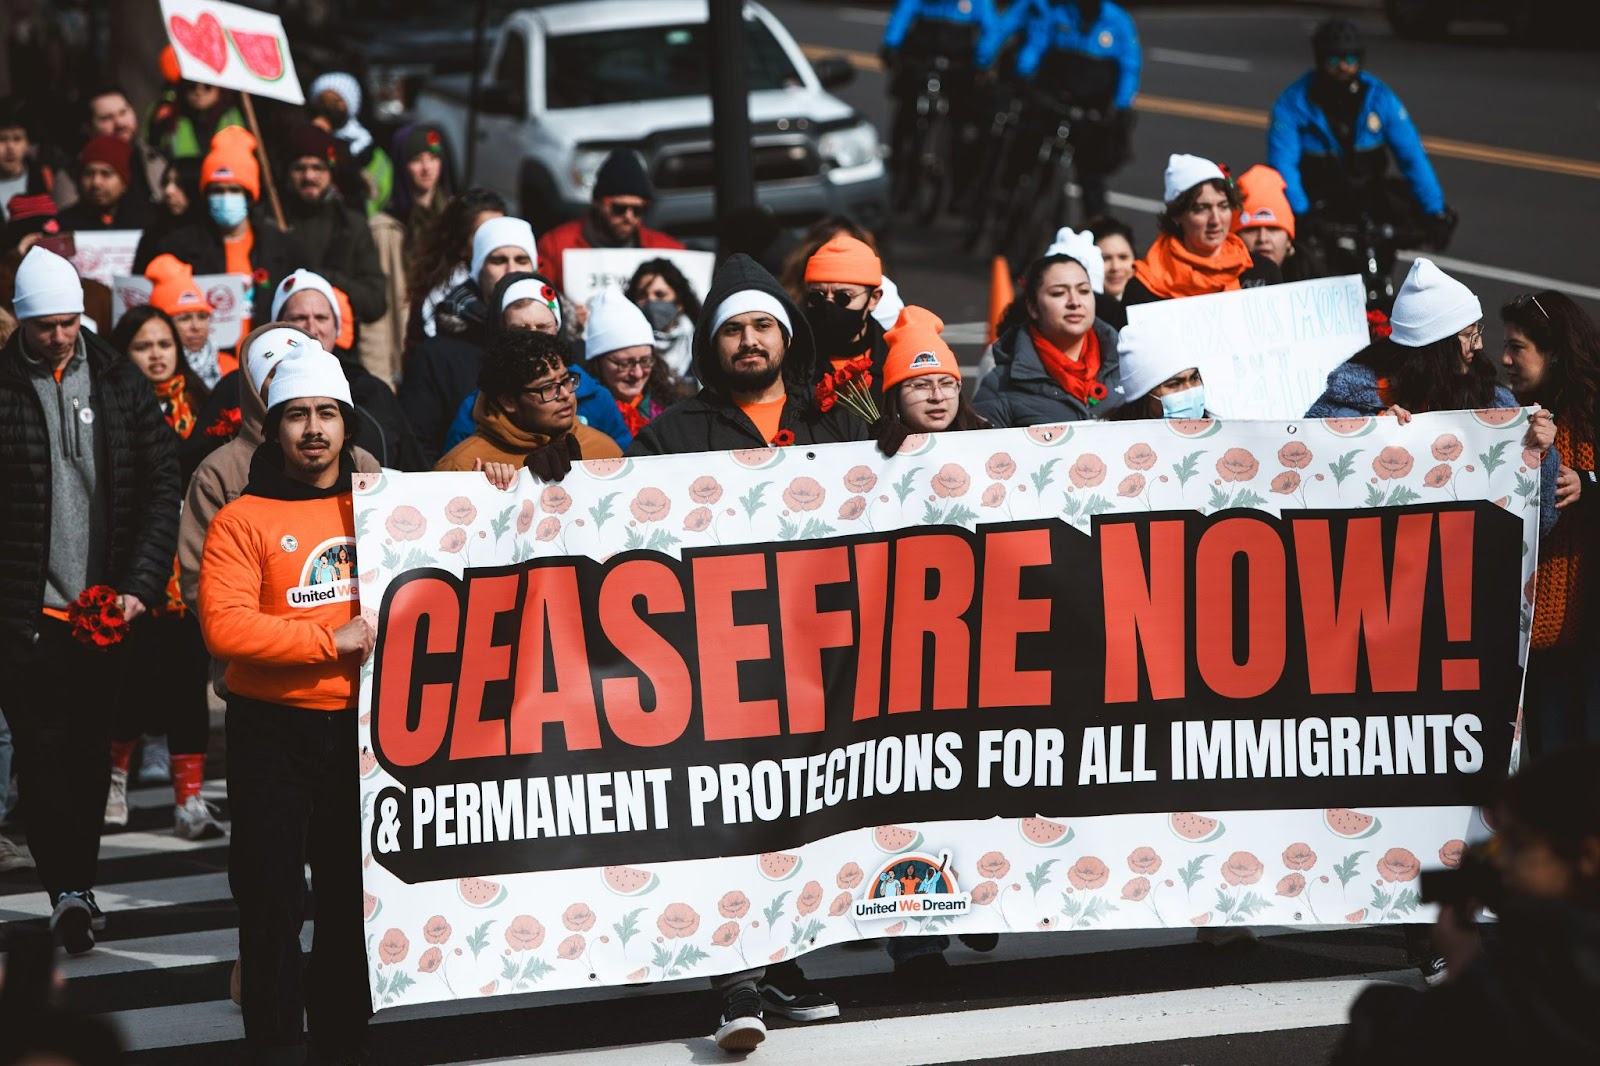 United We Dream and Allies Demand Permanent Ceasefire and Immigrant Protections